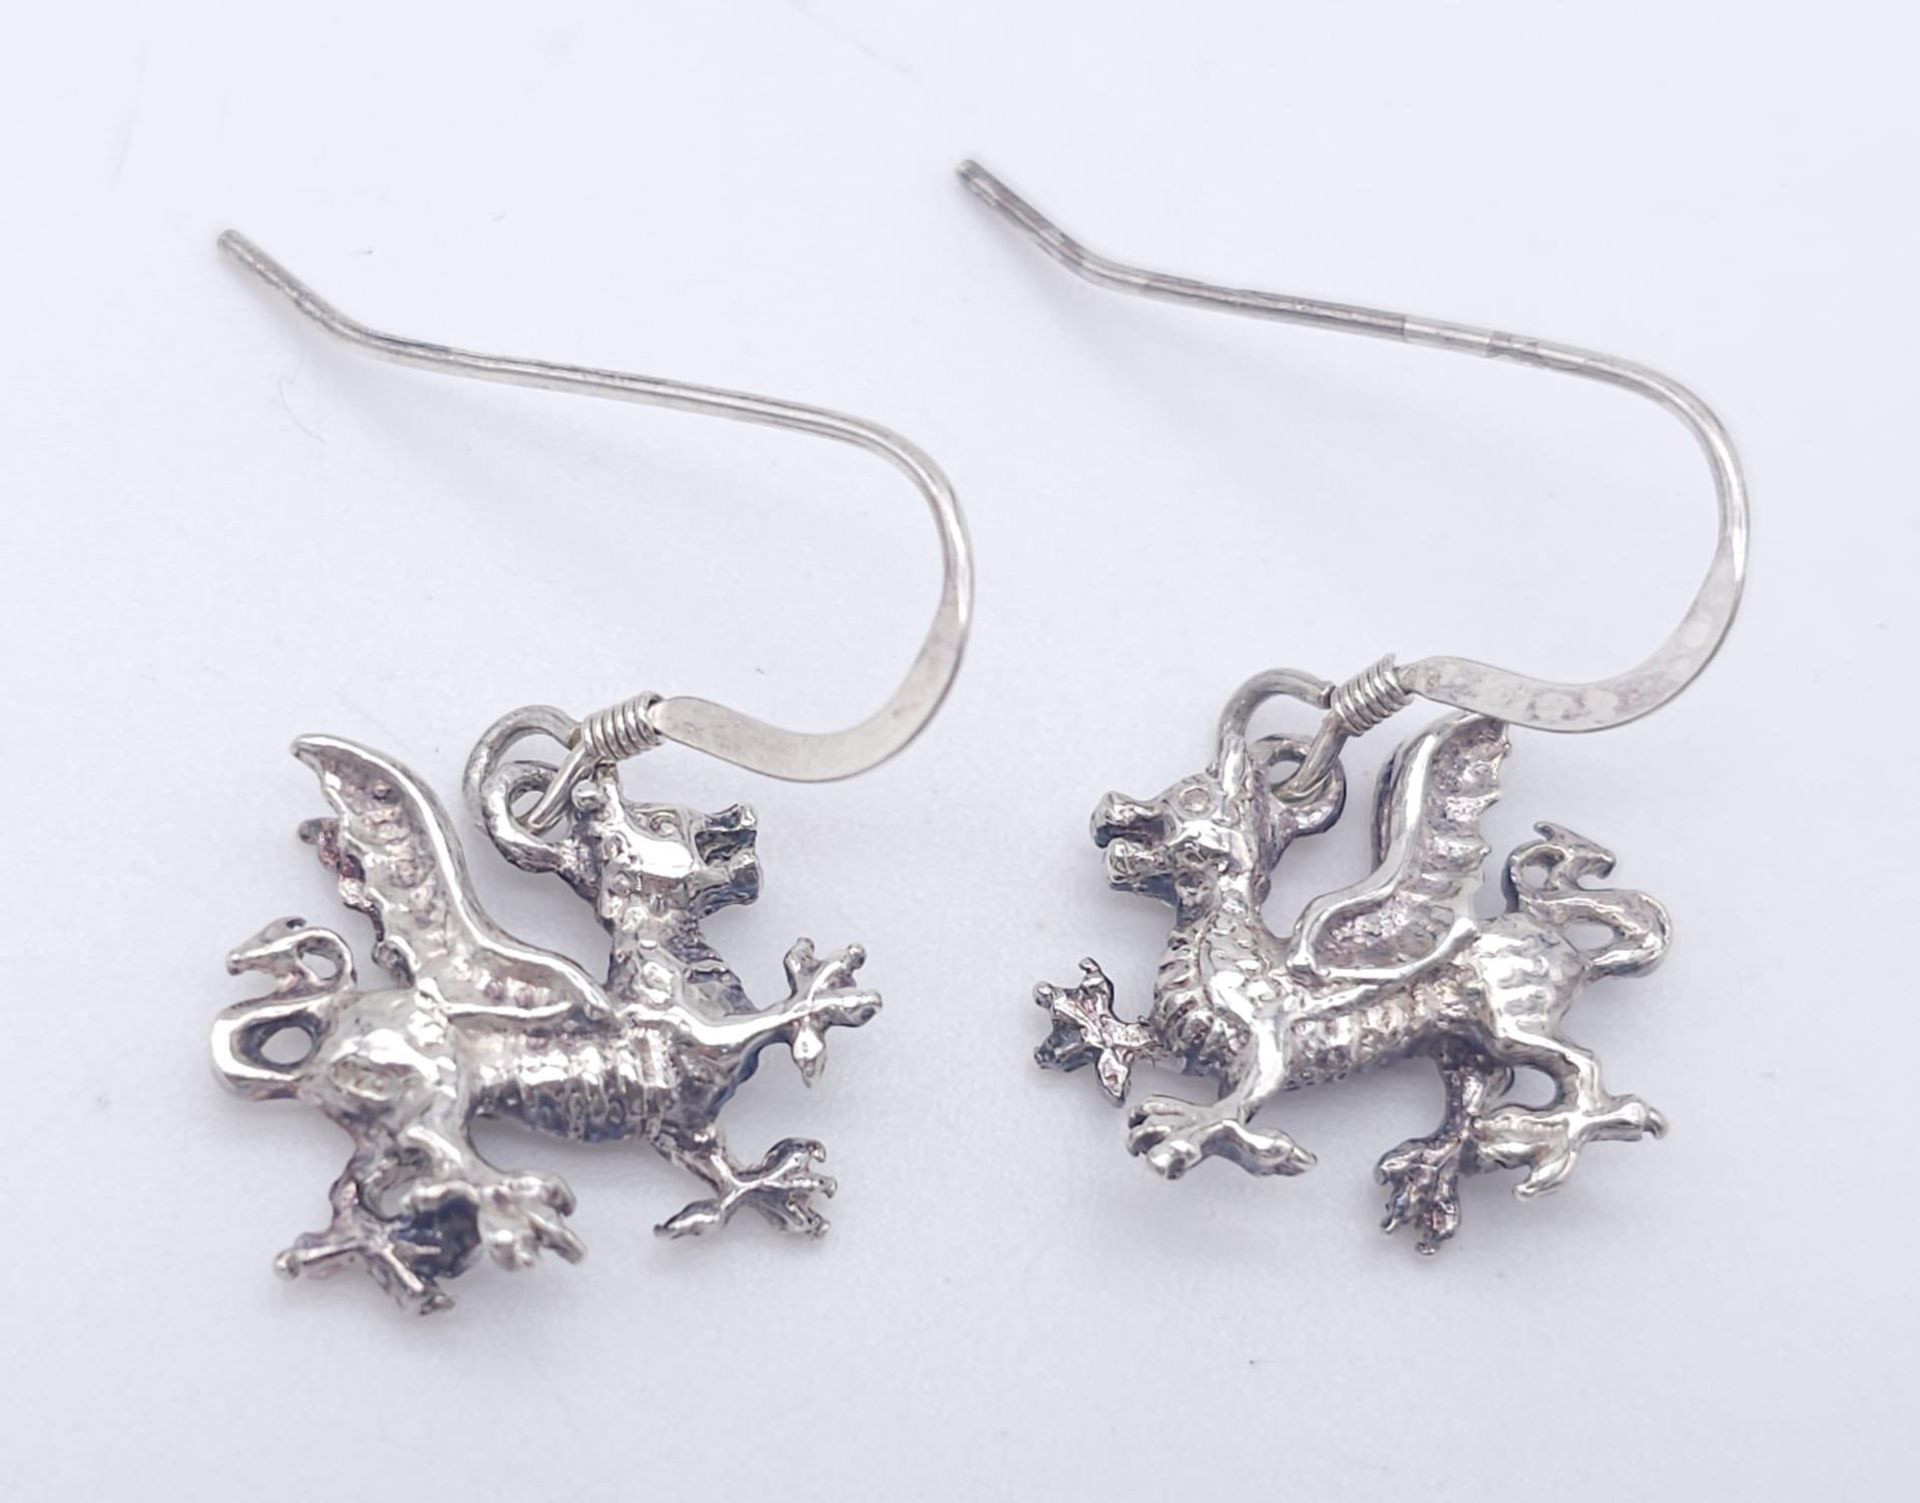 A STERLING SILVER WELSH DRAGON PAIR OF DROP EARRINGS AND MATCHING PENDANT / CHARM. 6.5G - Image 2 of 6